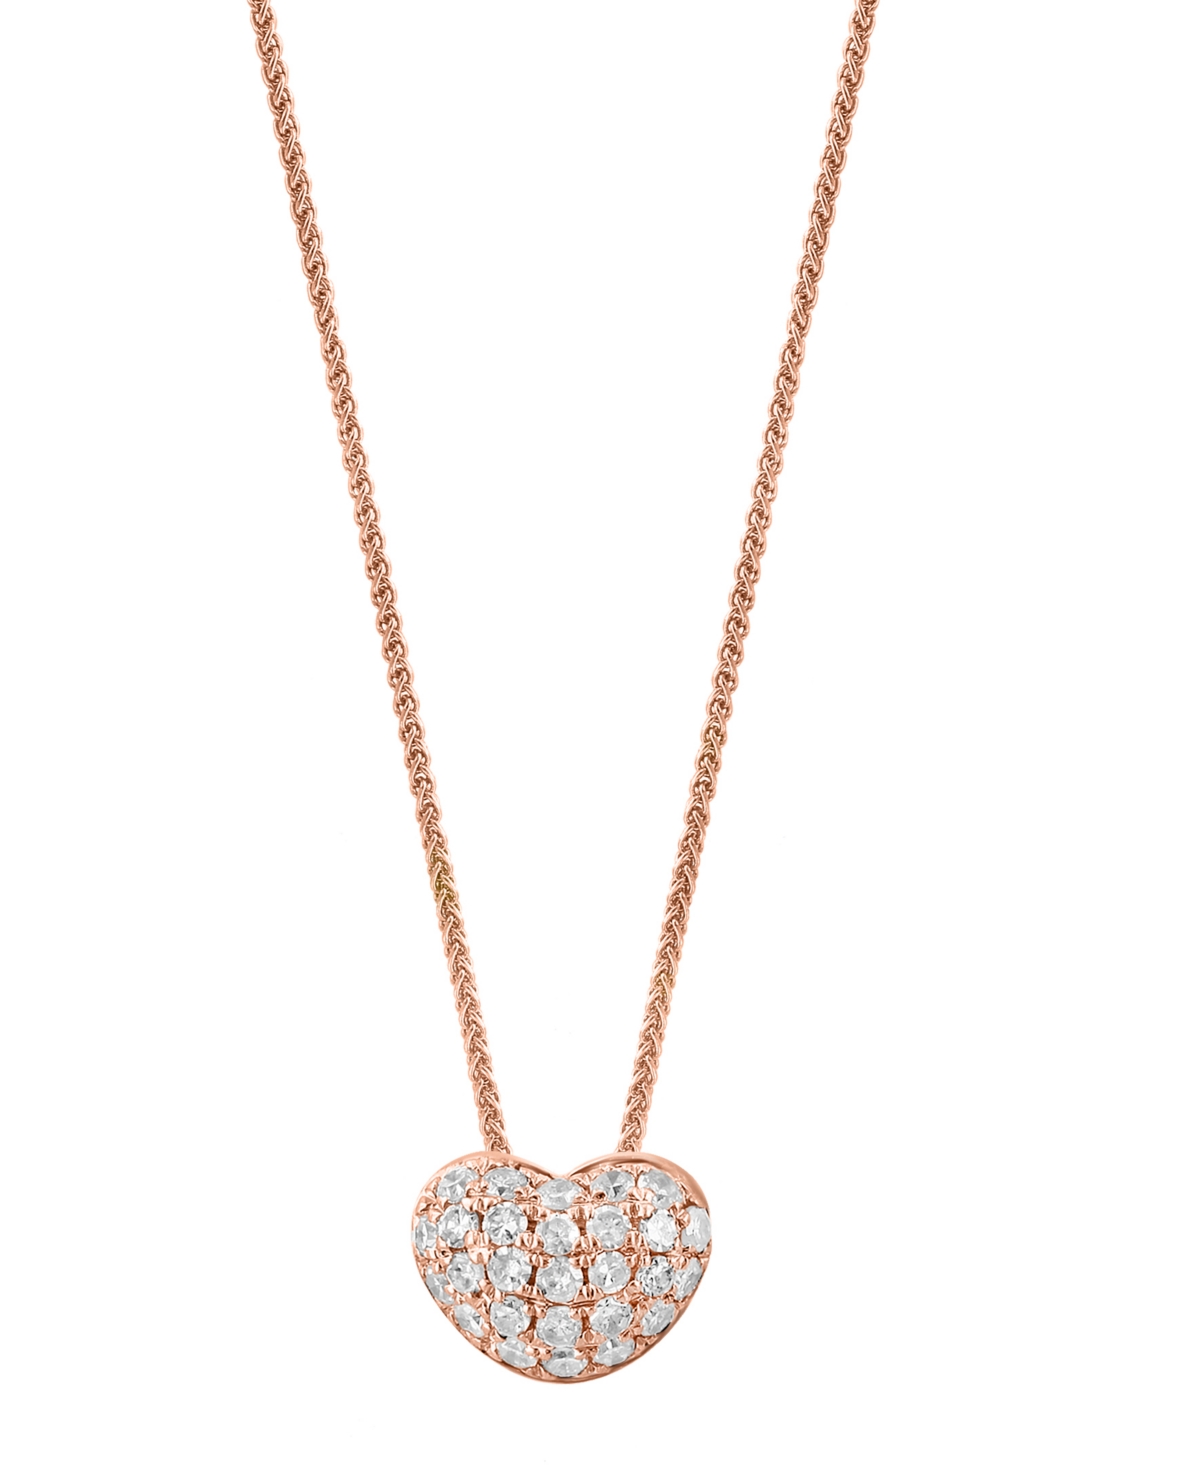 Lali Jewels Diamond Heart Pendant Necklace (3/8 ct. t.w.) in 14K Rose Gold